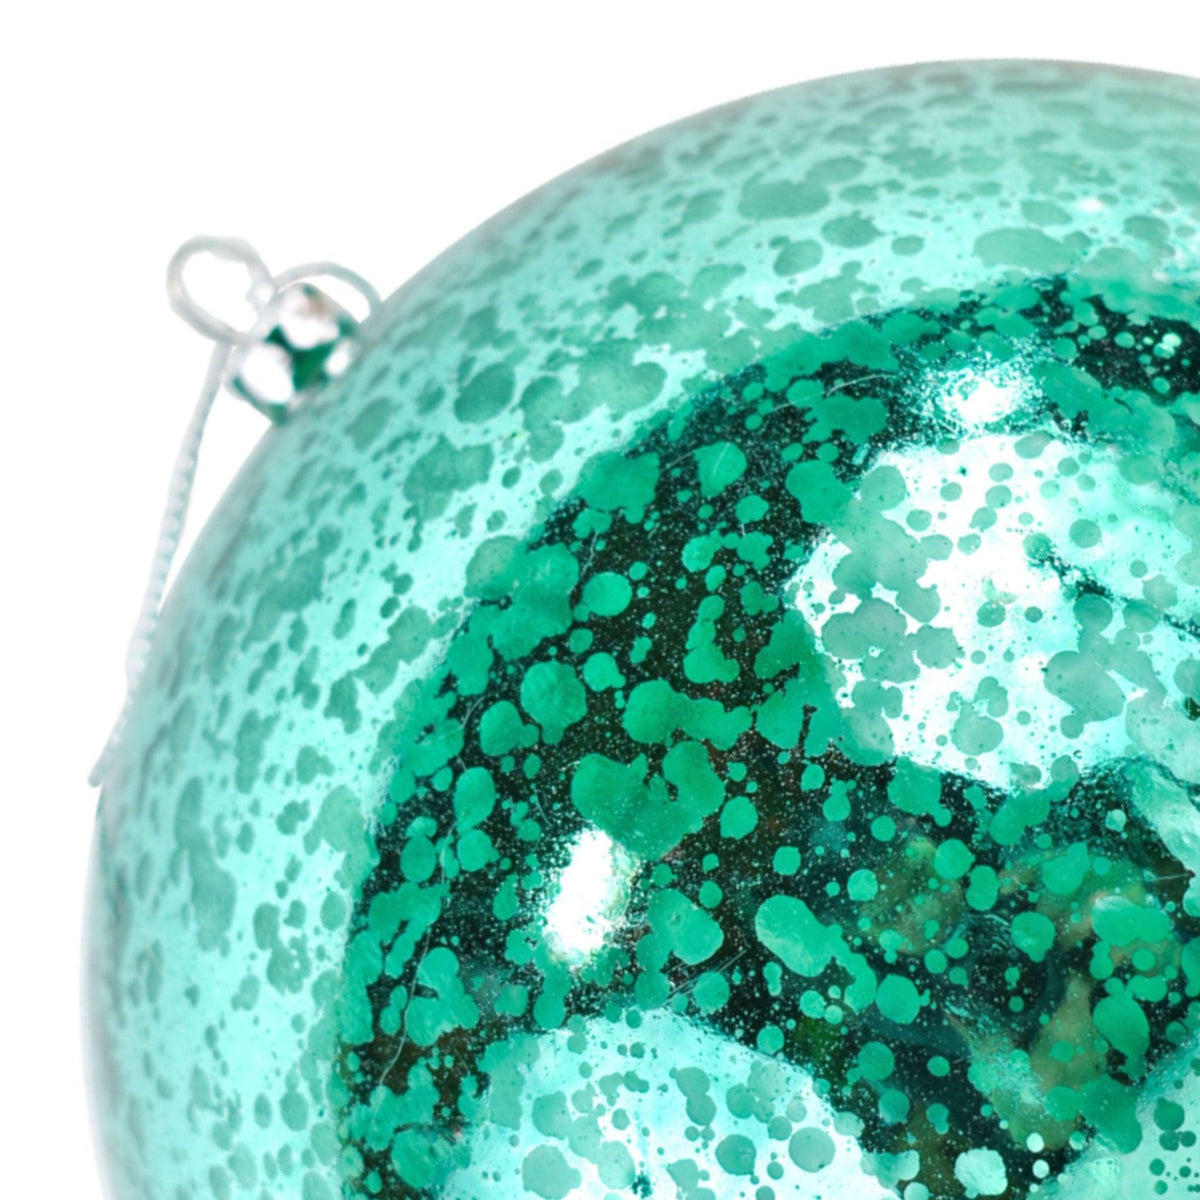 Lee Display offers brand new Shiny Fuscia Sequin Green Plastic Ball Ornaments at wholesale prices for affordable Christmas Tree Hanging and Holiday Decorating on sale at leedisplay.com